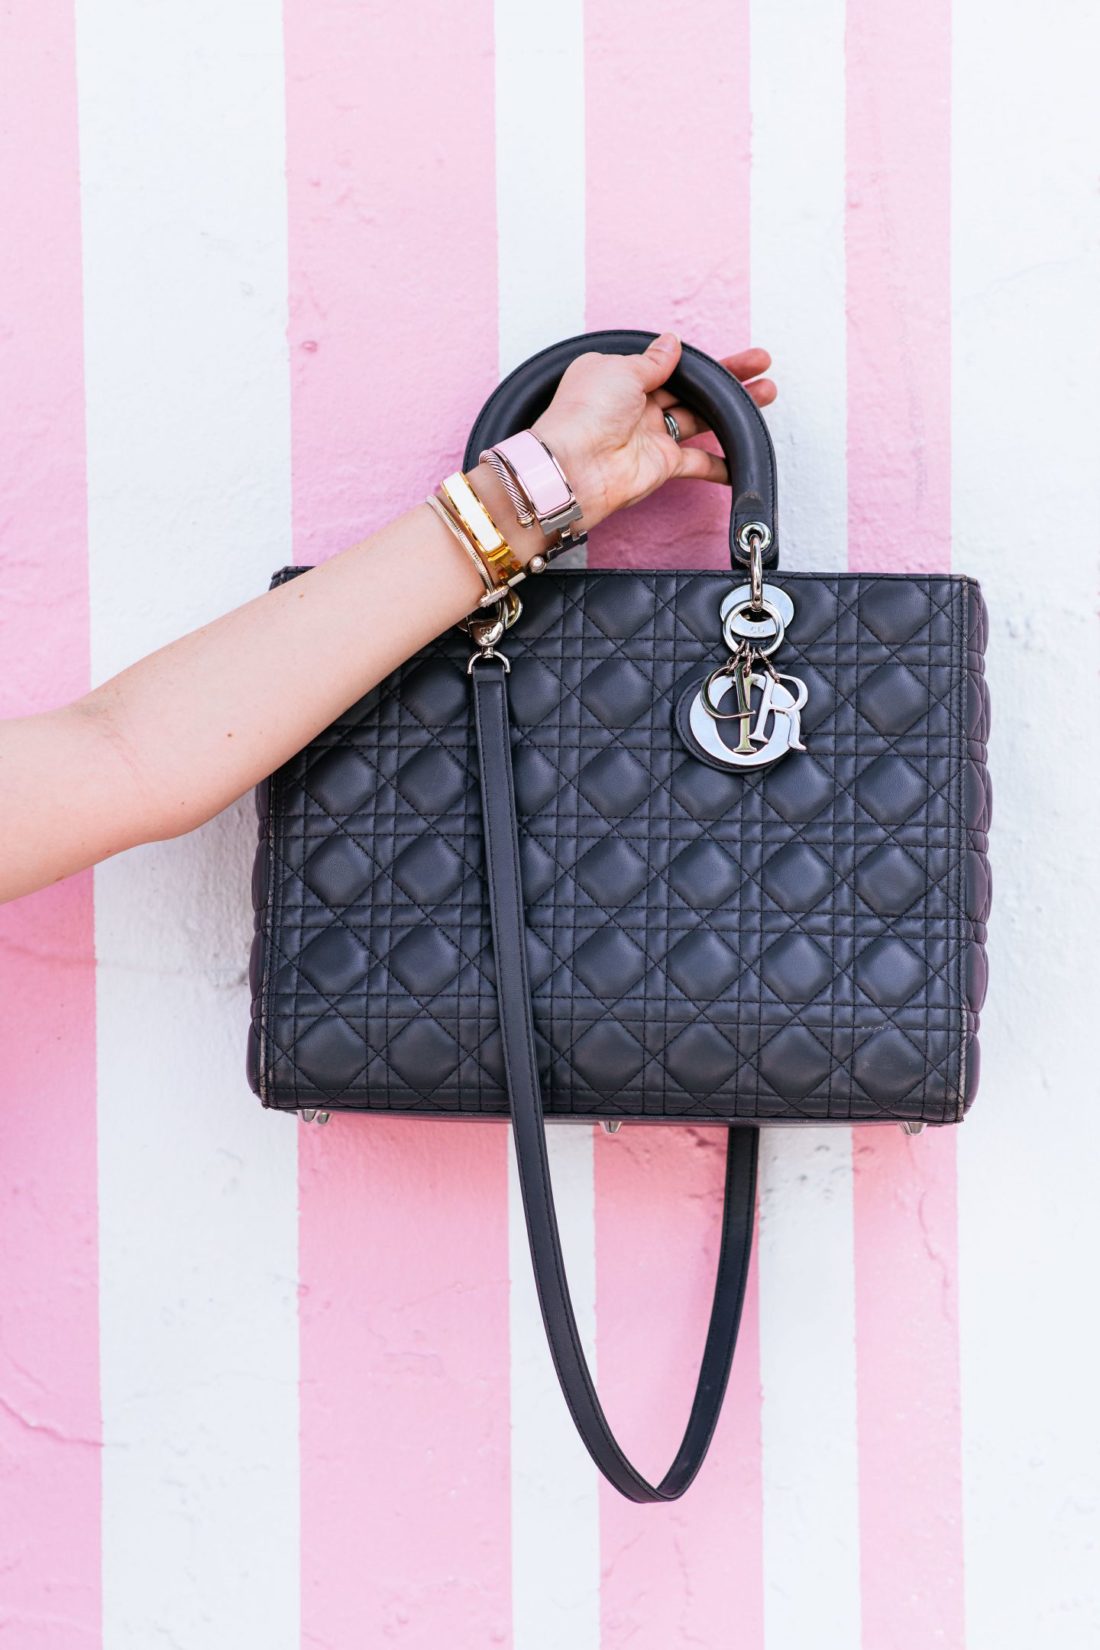 How to purchase designer handbags on a budget - Curated by Kirsten